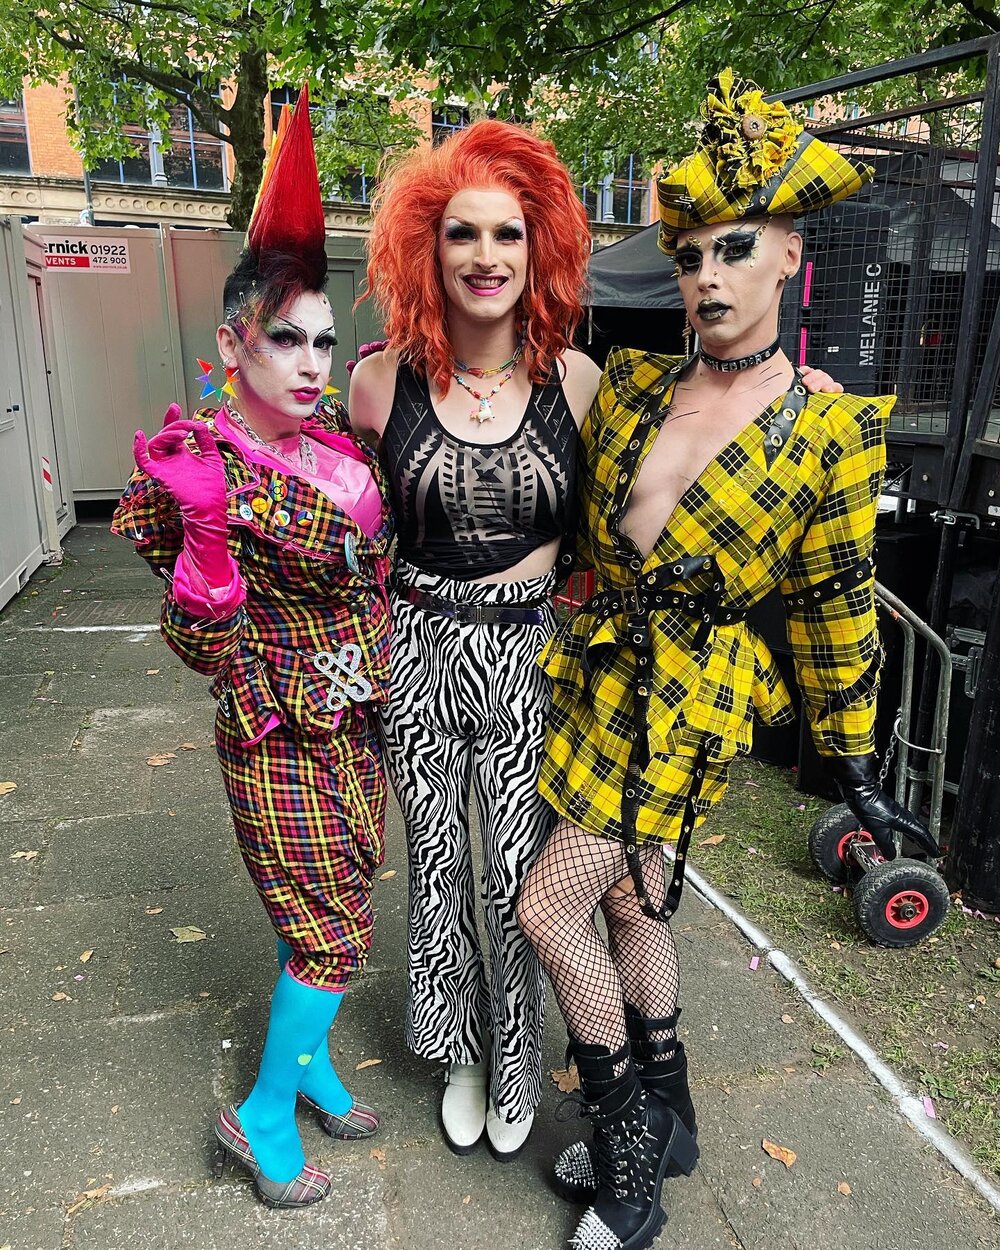 💃🏼 Such mad respect for these incredible drag beings! 
&bull;
Thank you @cheddar_gorgeous and @annaphylactic1 for making my performance on the Alan Turing stage so special 😭
&bull;
Endlessly inspired by these forces of nature &mdash;I wanna be as 